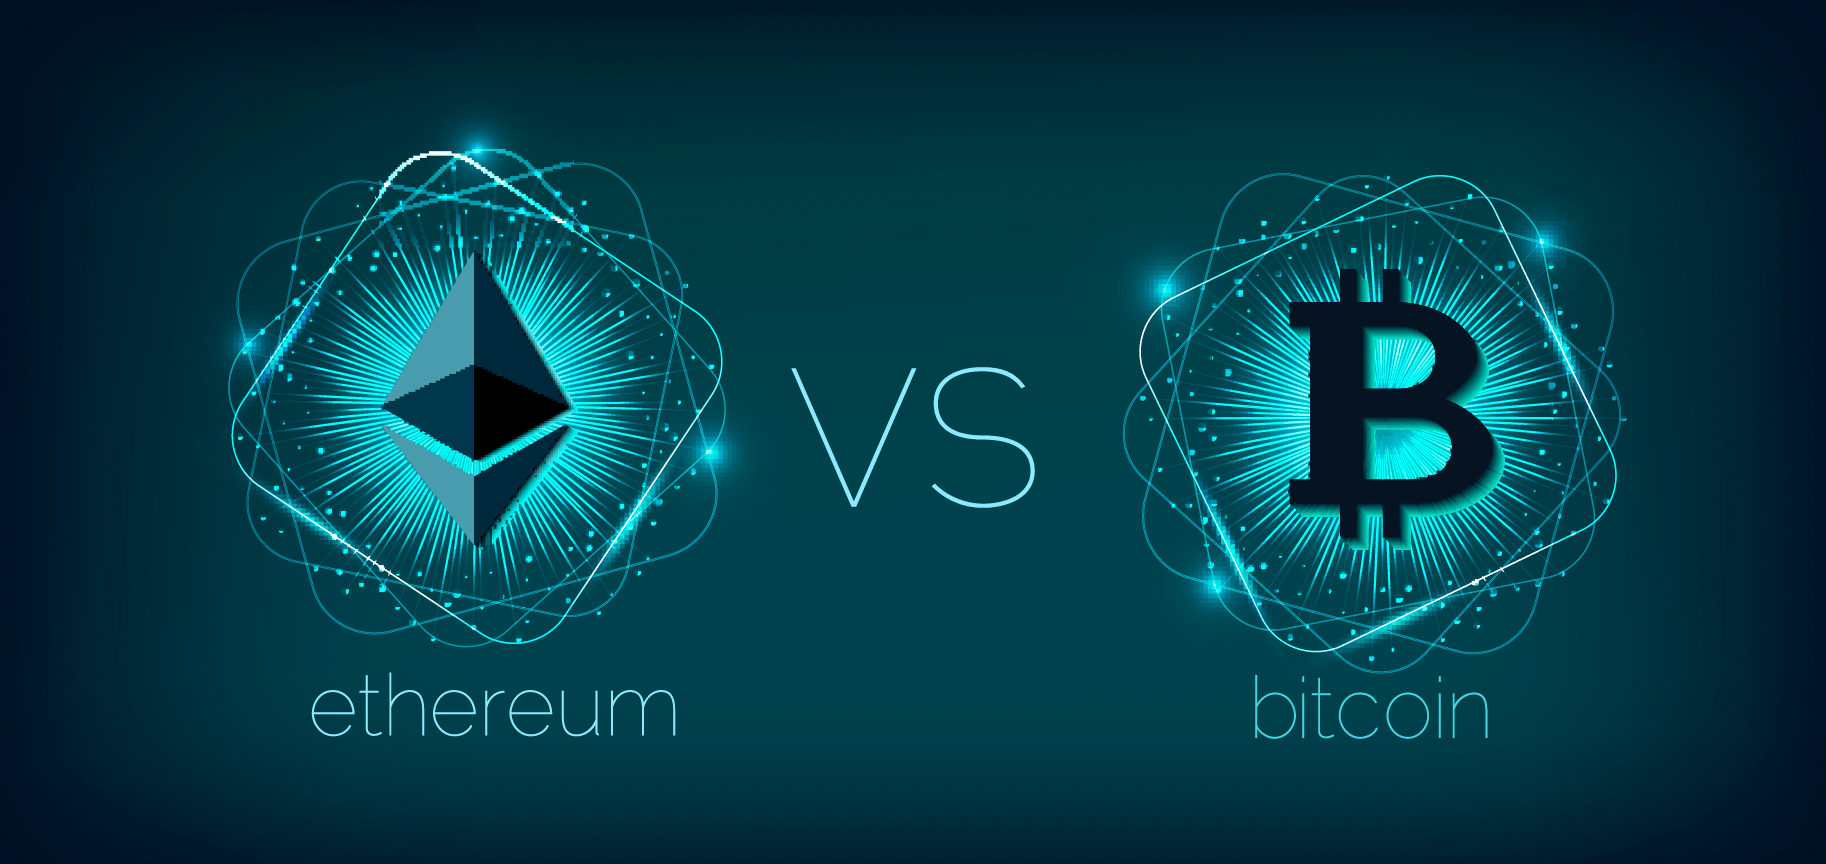 4 reasons why Ethereum is finally topping out versus Bitcoin